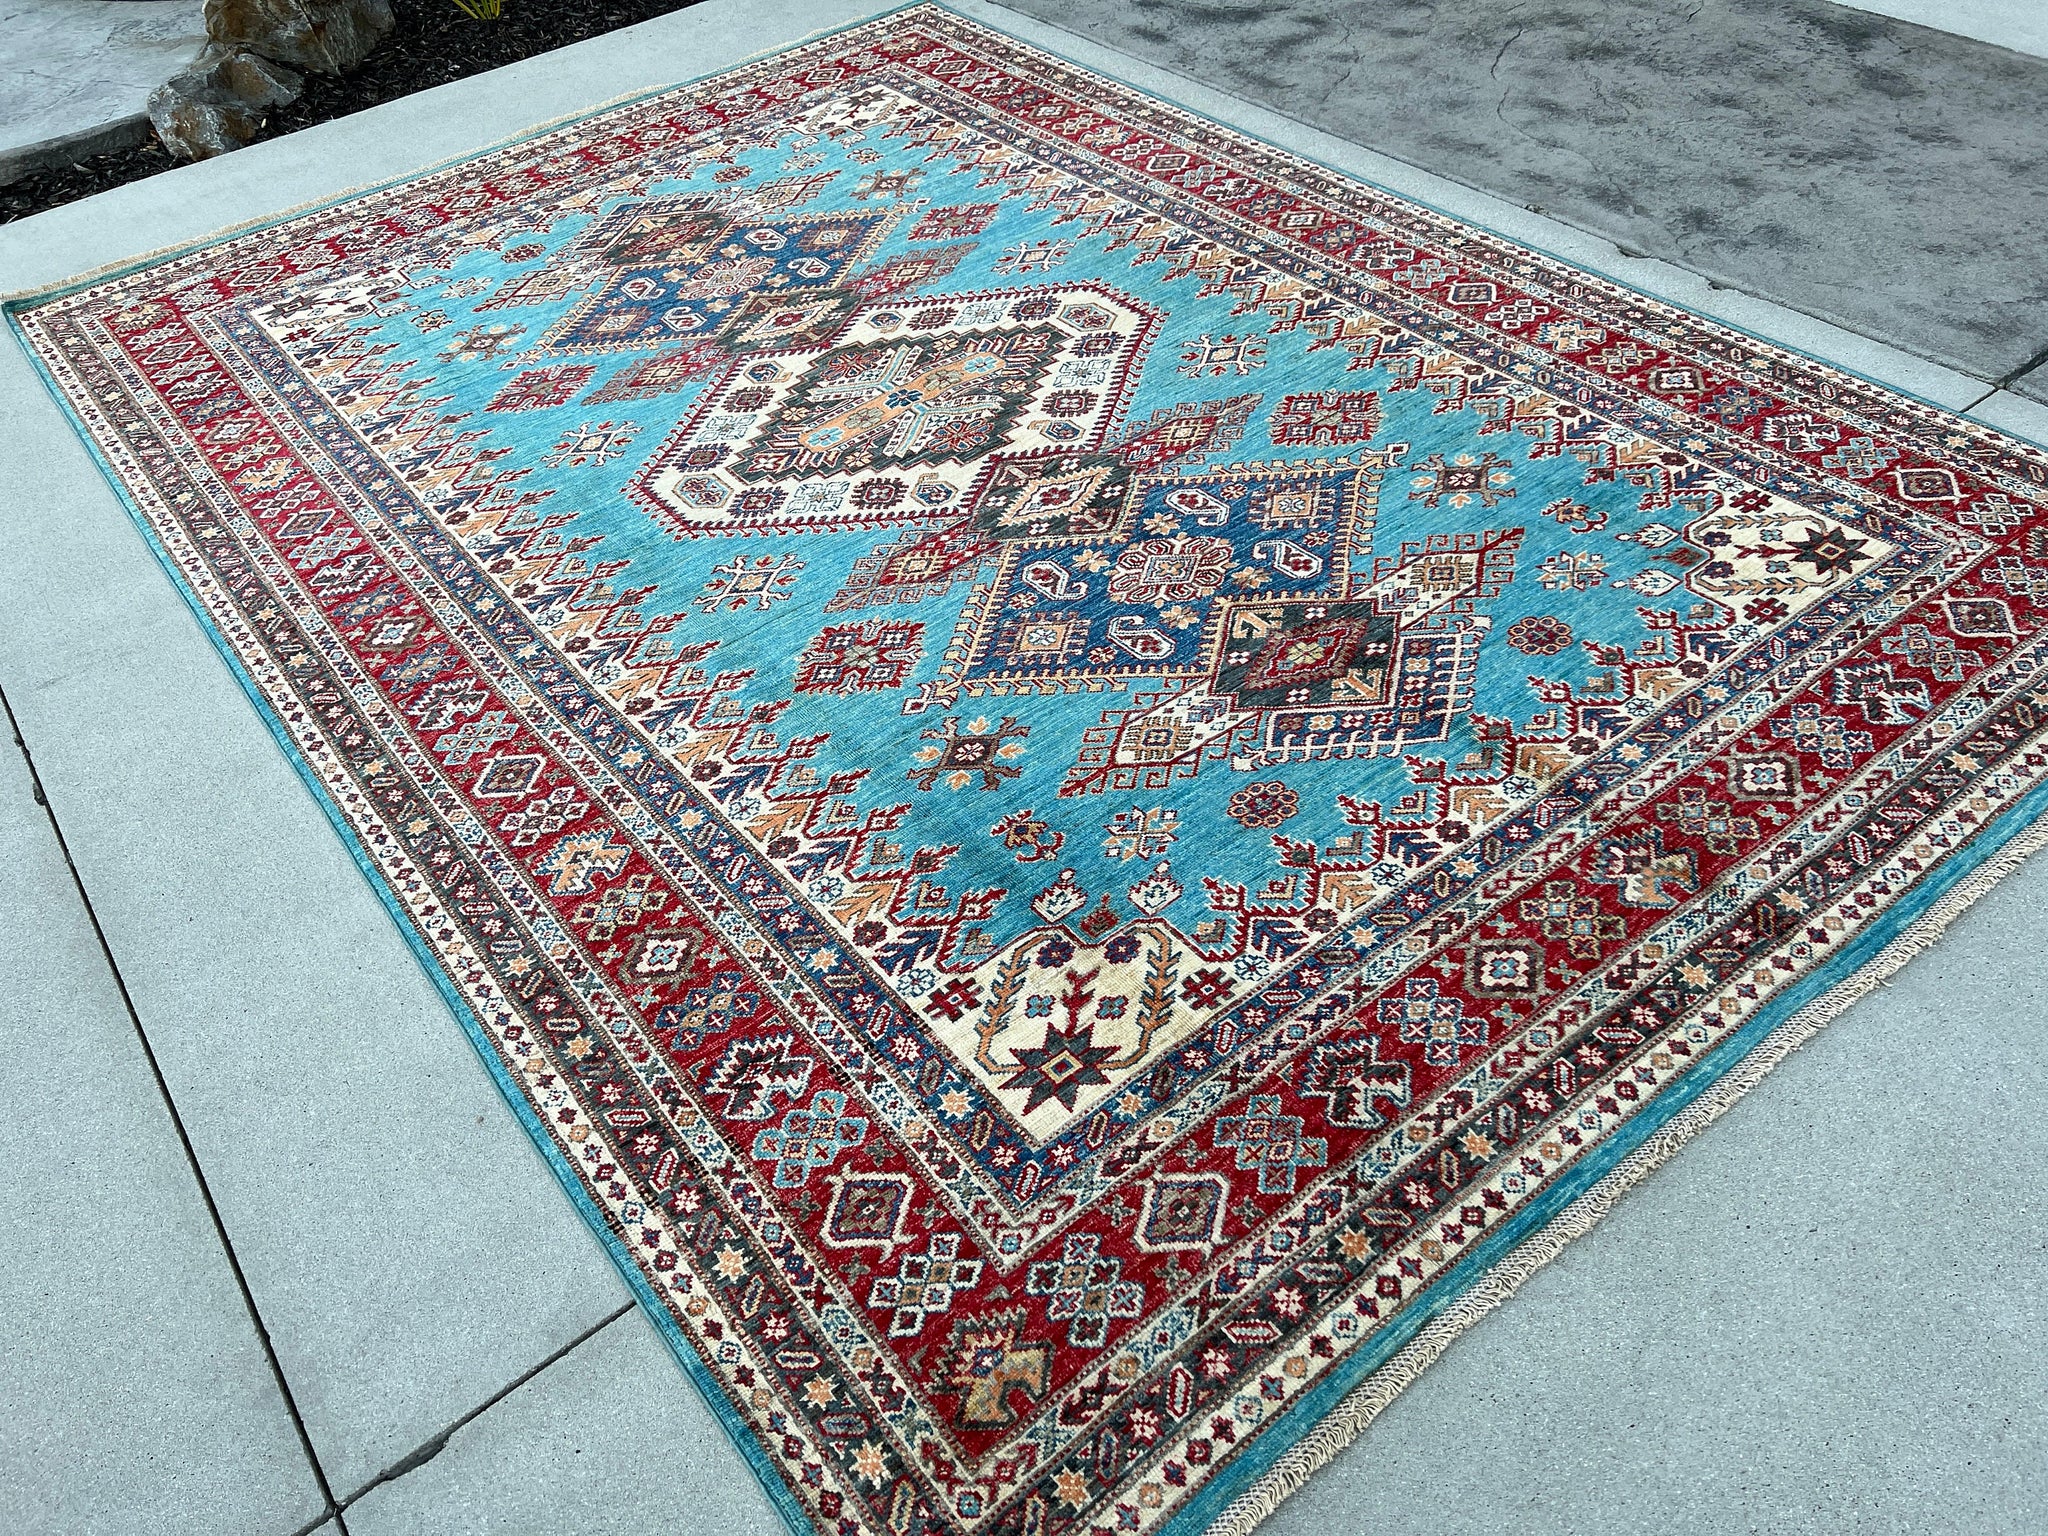 7x10 (215x305) Handmade Afghan Rug | Turquoise Ivory Red Blue Sage Green Caramel | Hand Knotted Turkish Moroccan Oriental Persian Oushak